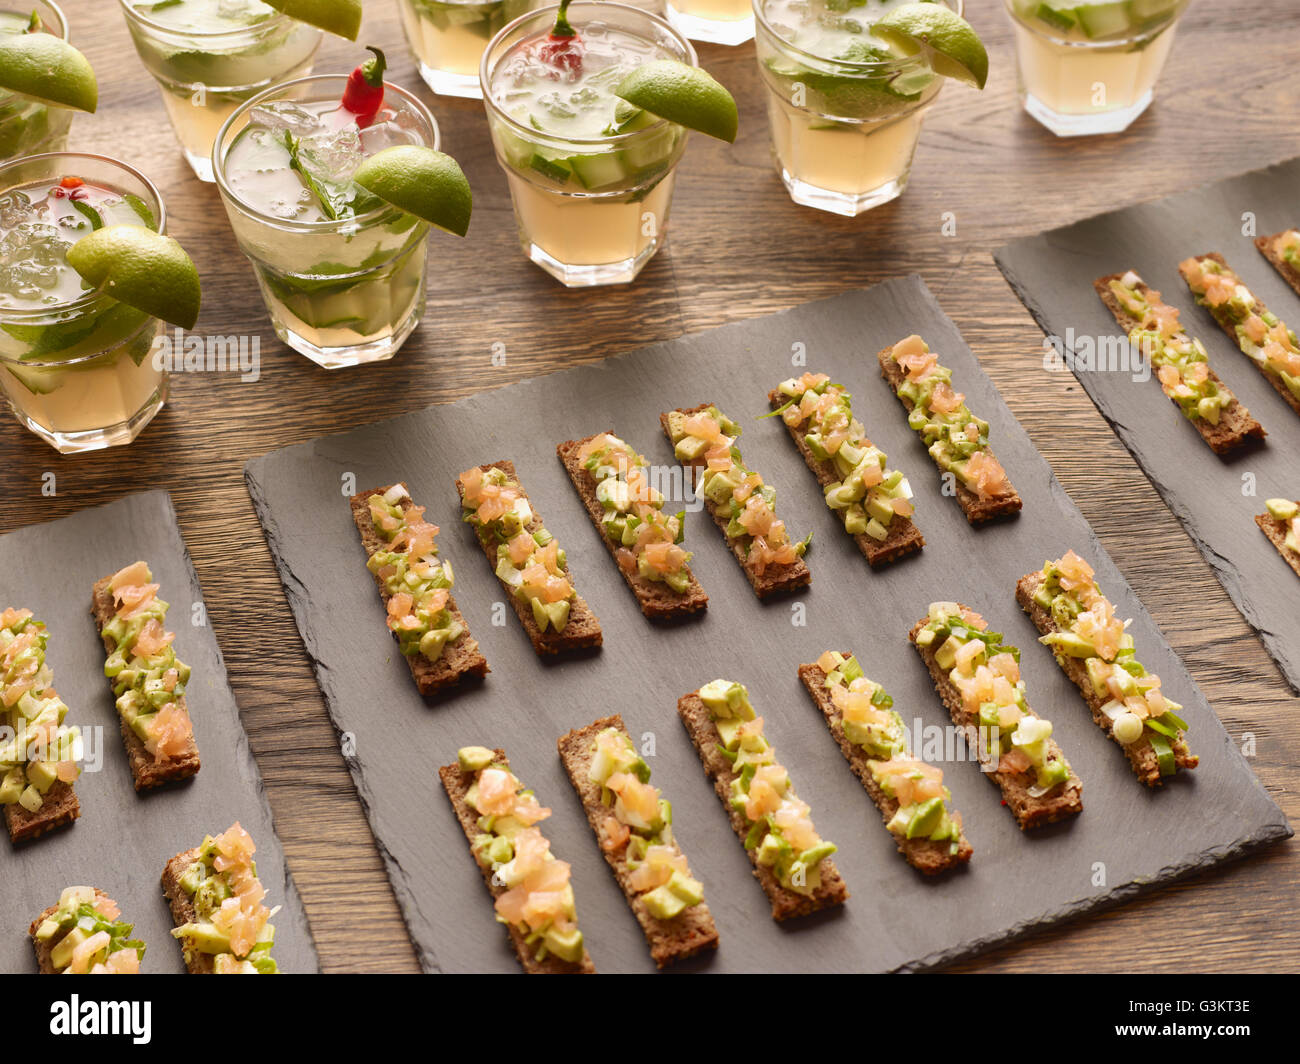 Guacamole, smoked salmon and rye bread canapes with vodka cocktail garnished with lime wedges Stock Photo